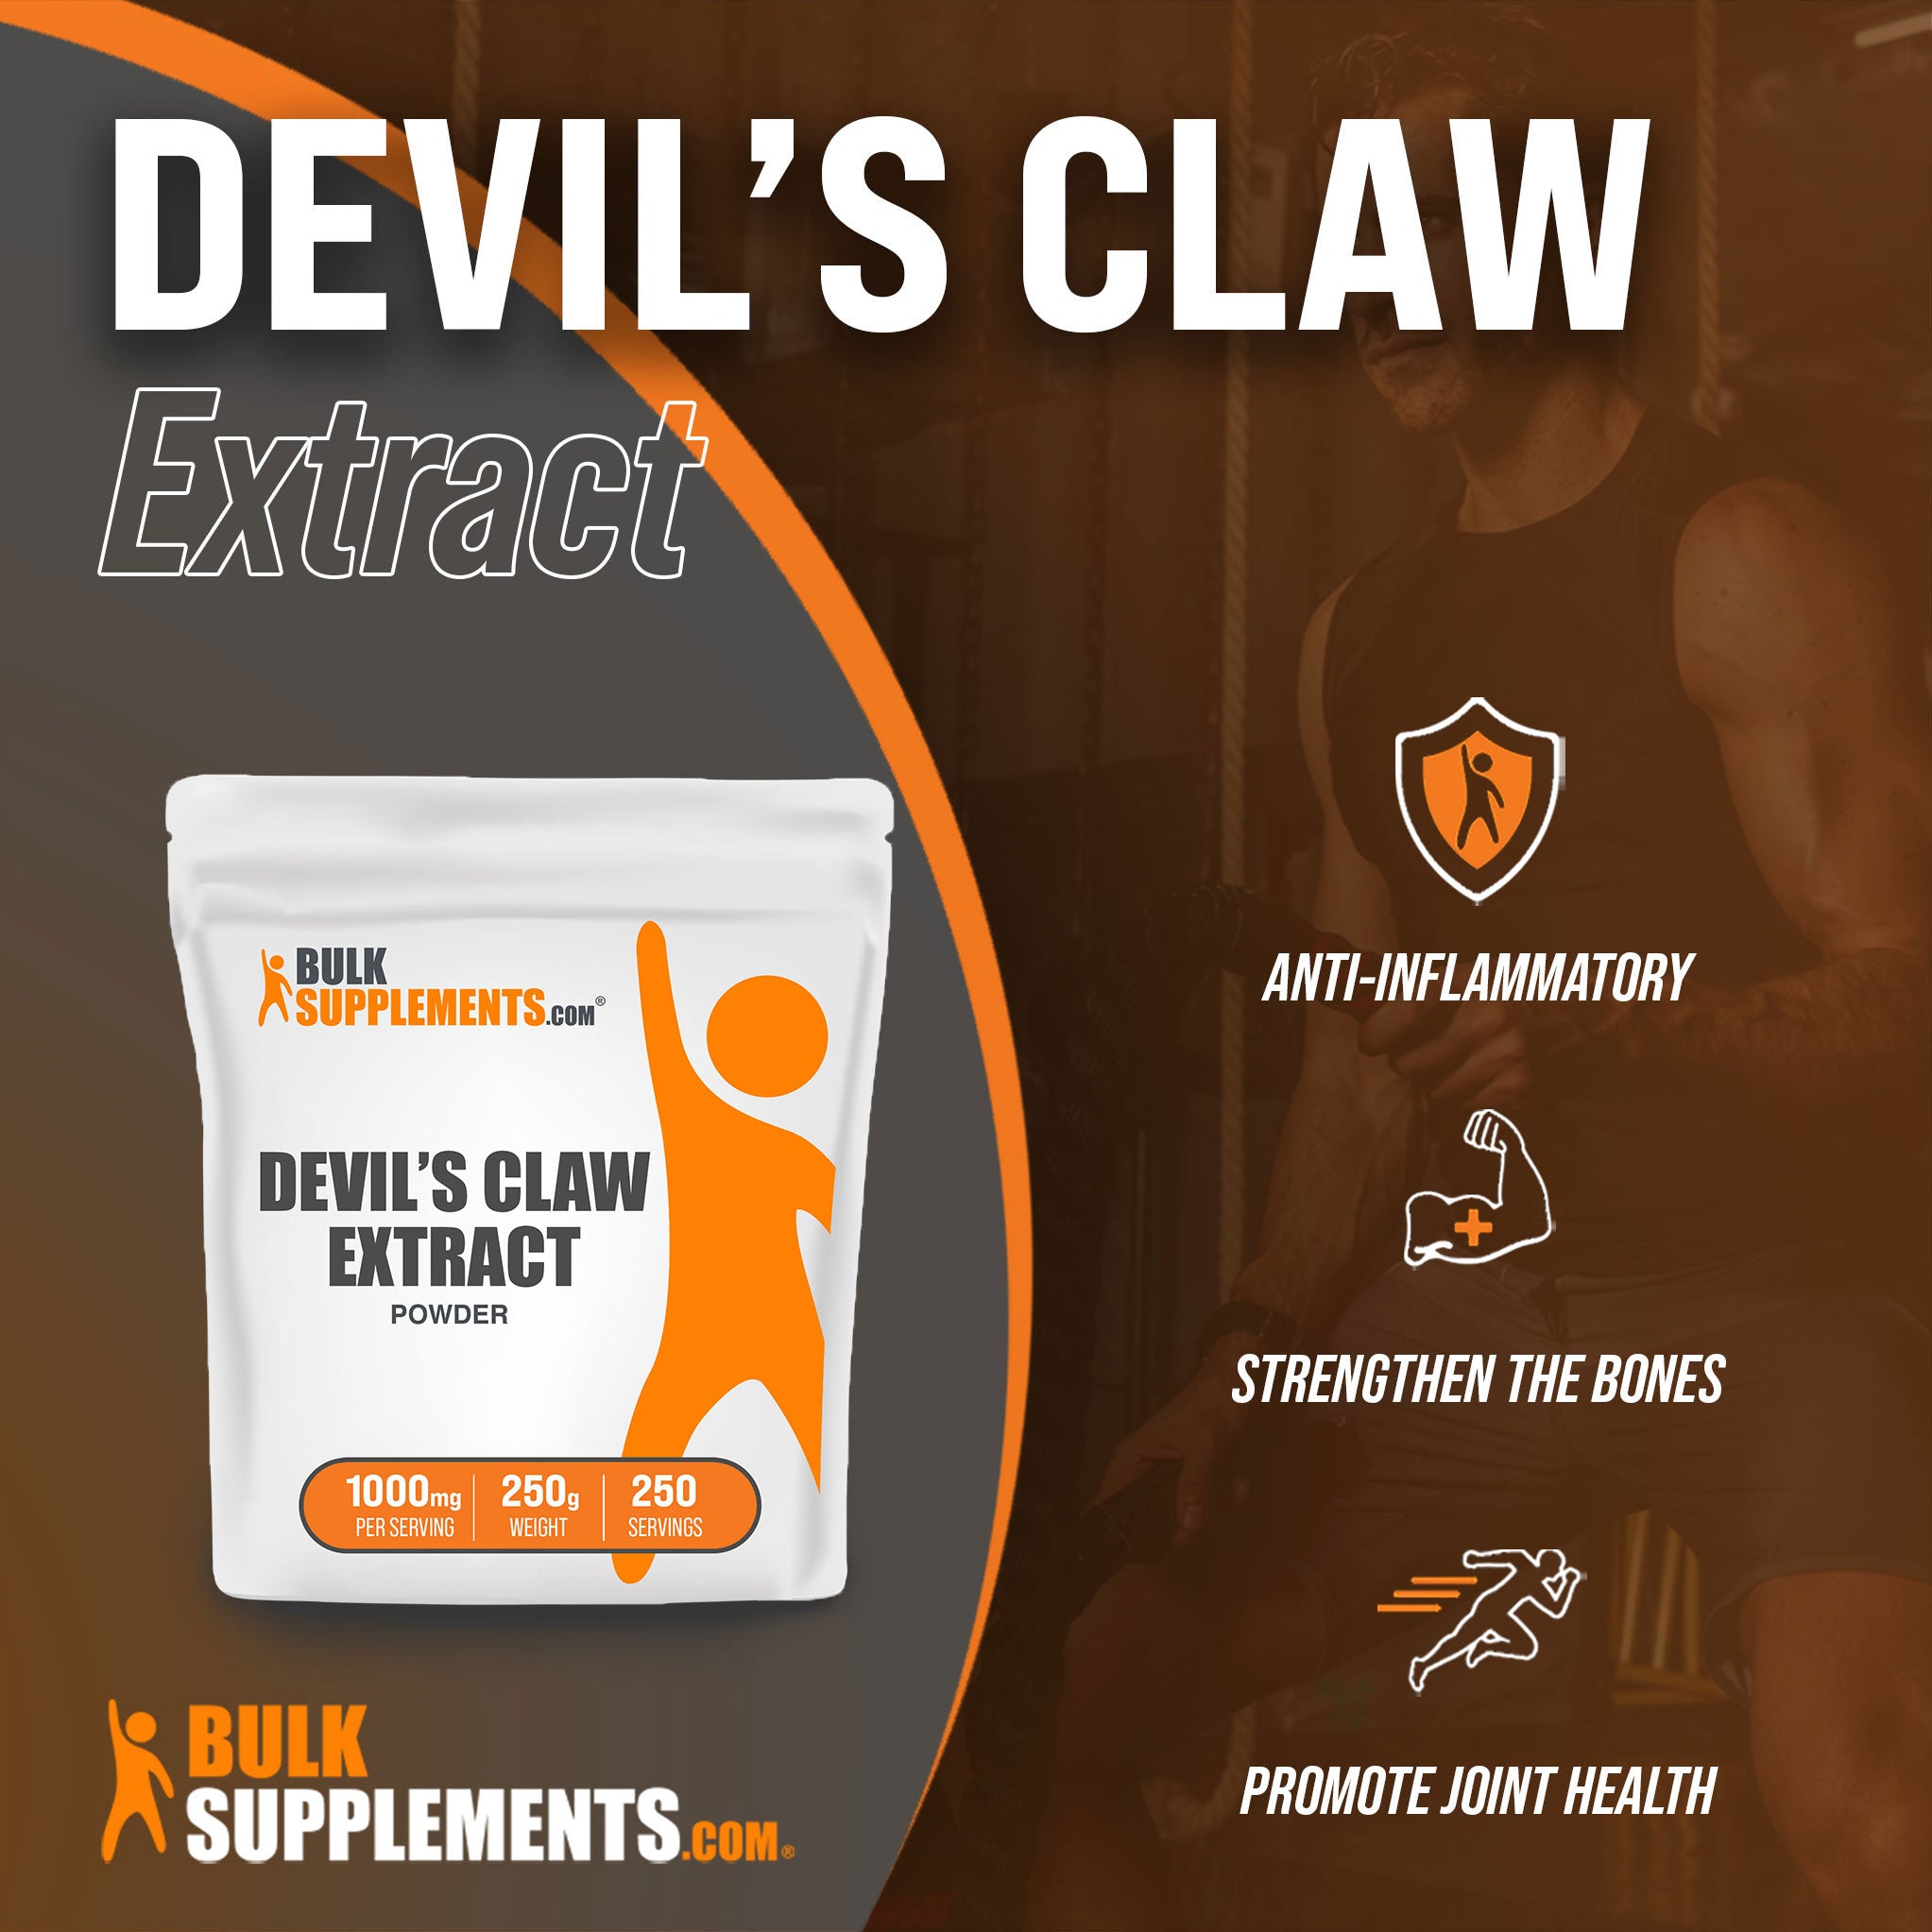 Benefits of Devil's Claw Extract; anti-inflammatory, strengthen the bones, promote joint health